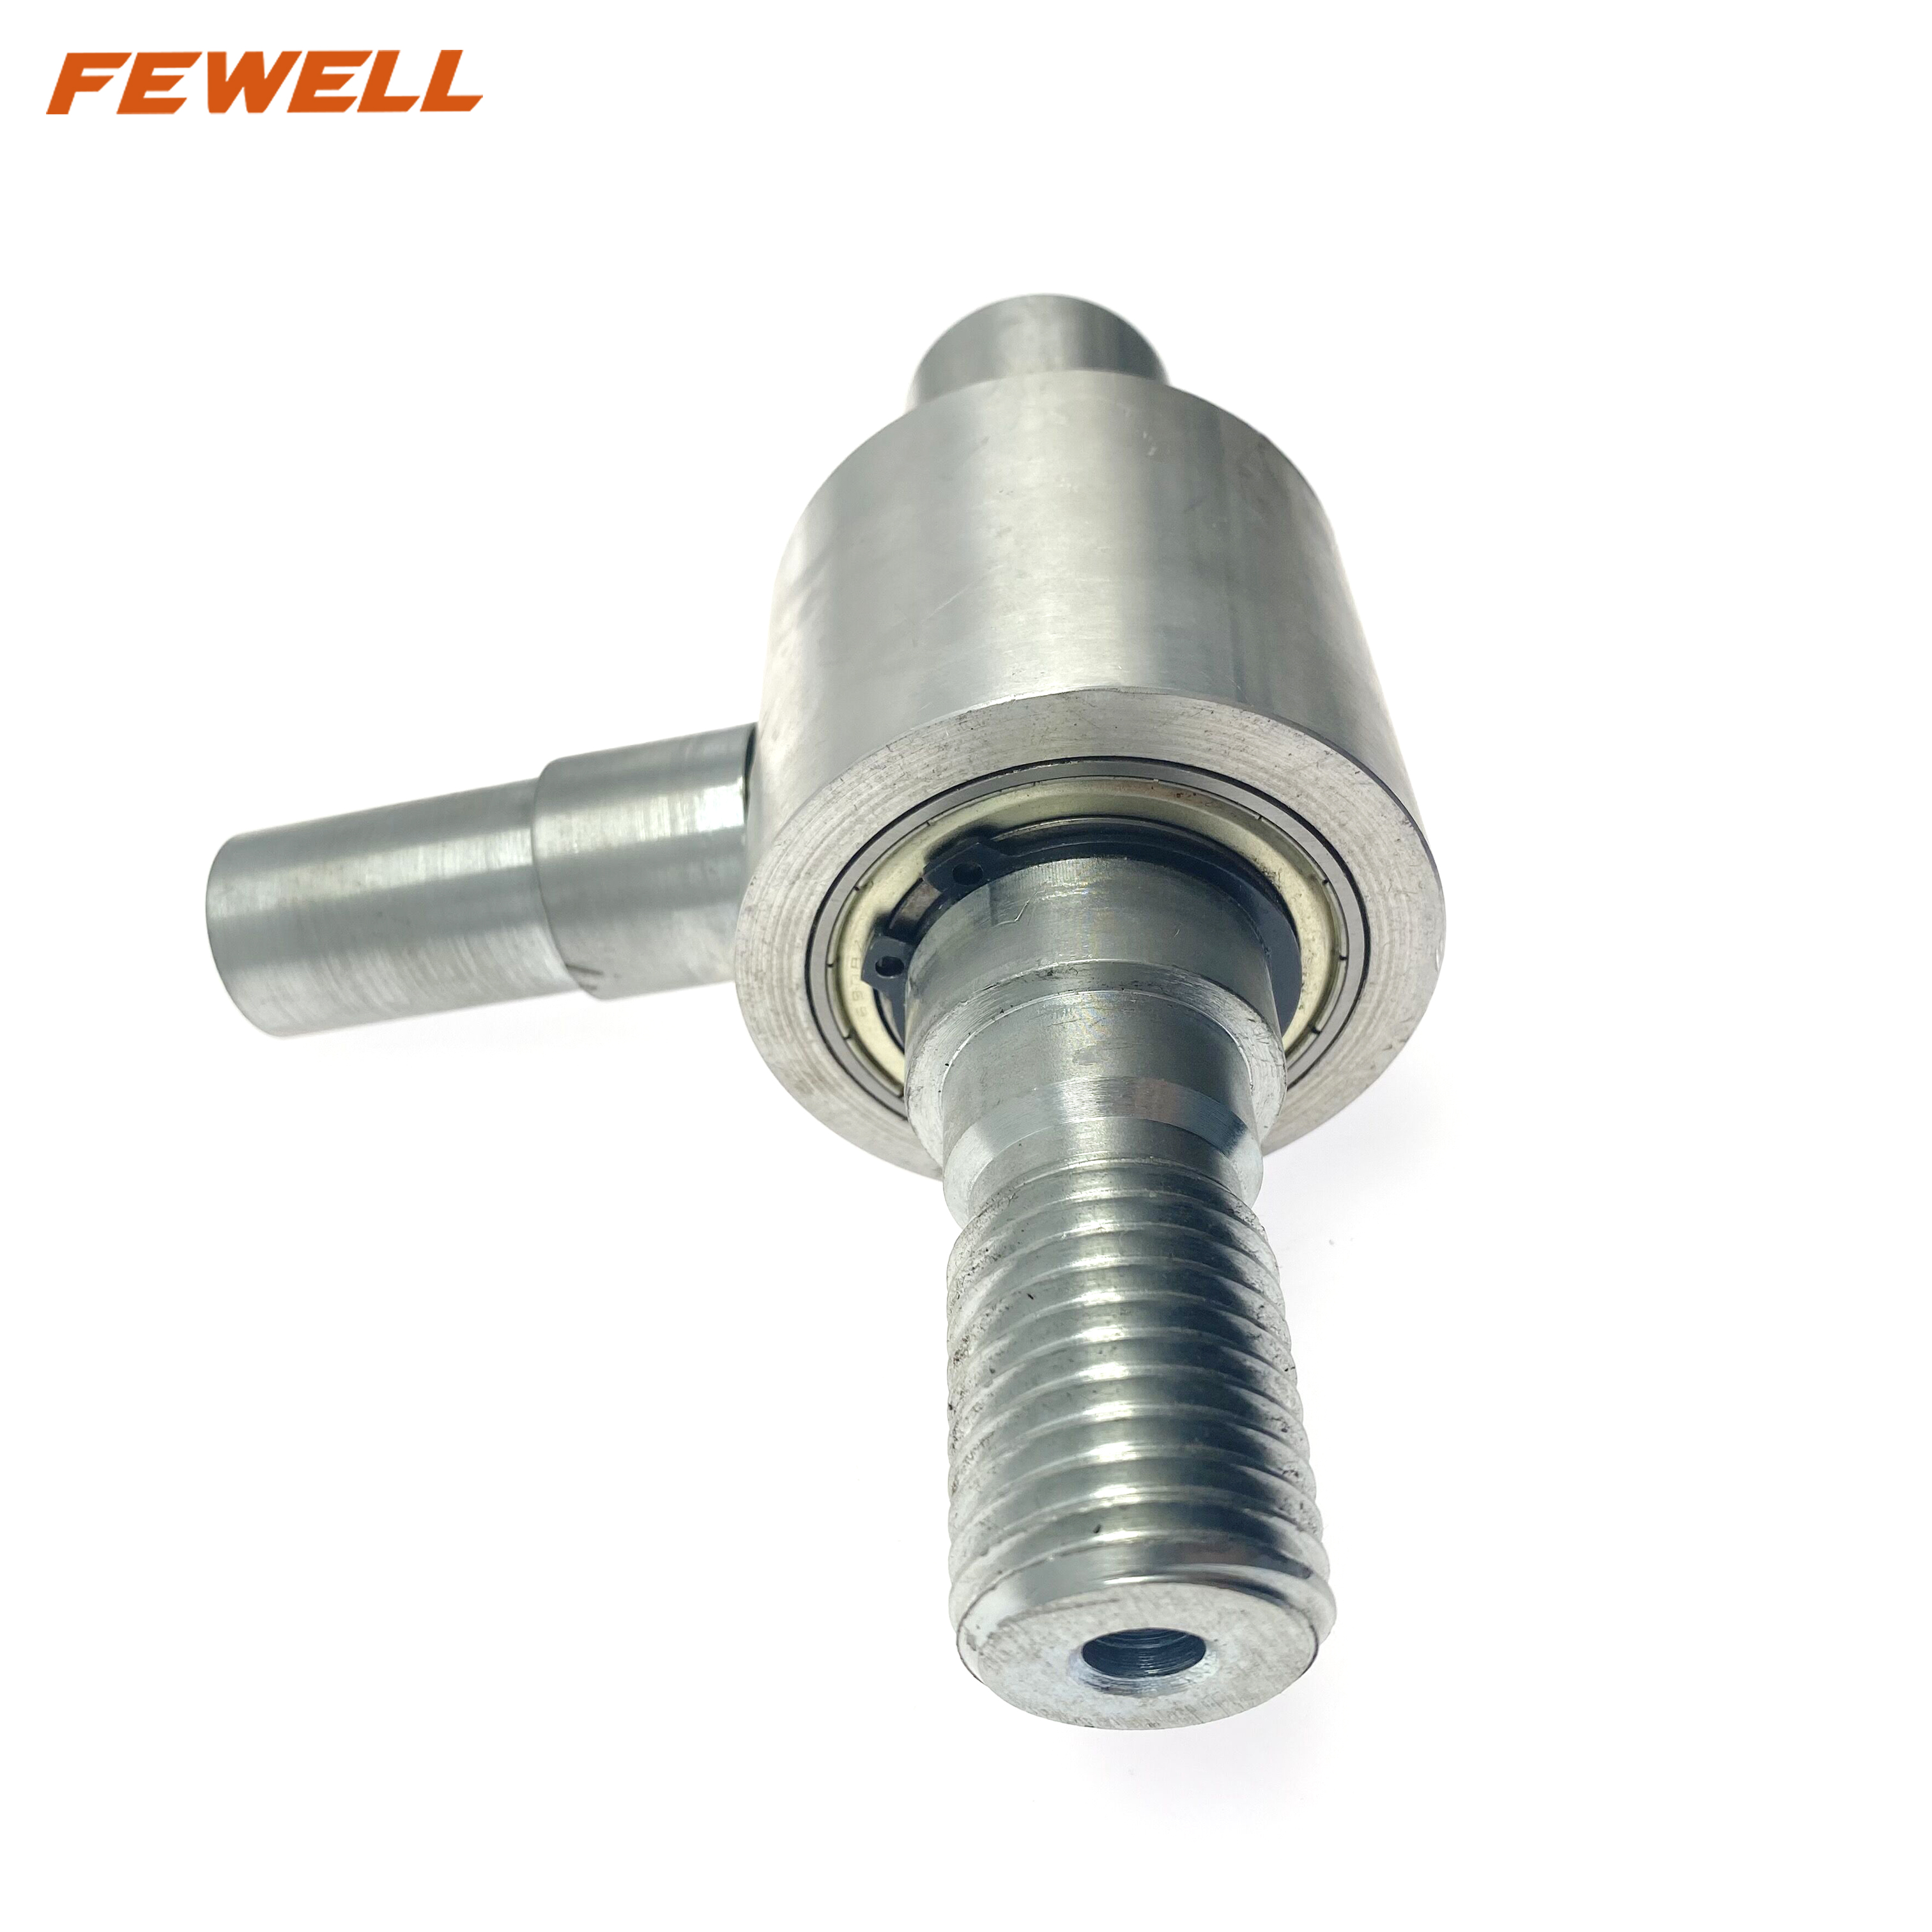 High quality Diamond Core Drill Bit thread 1-1/4 UNC Connection Exchange Adapter without water